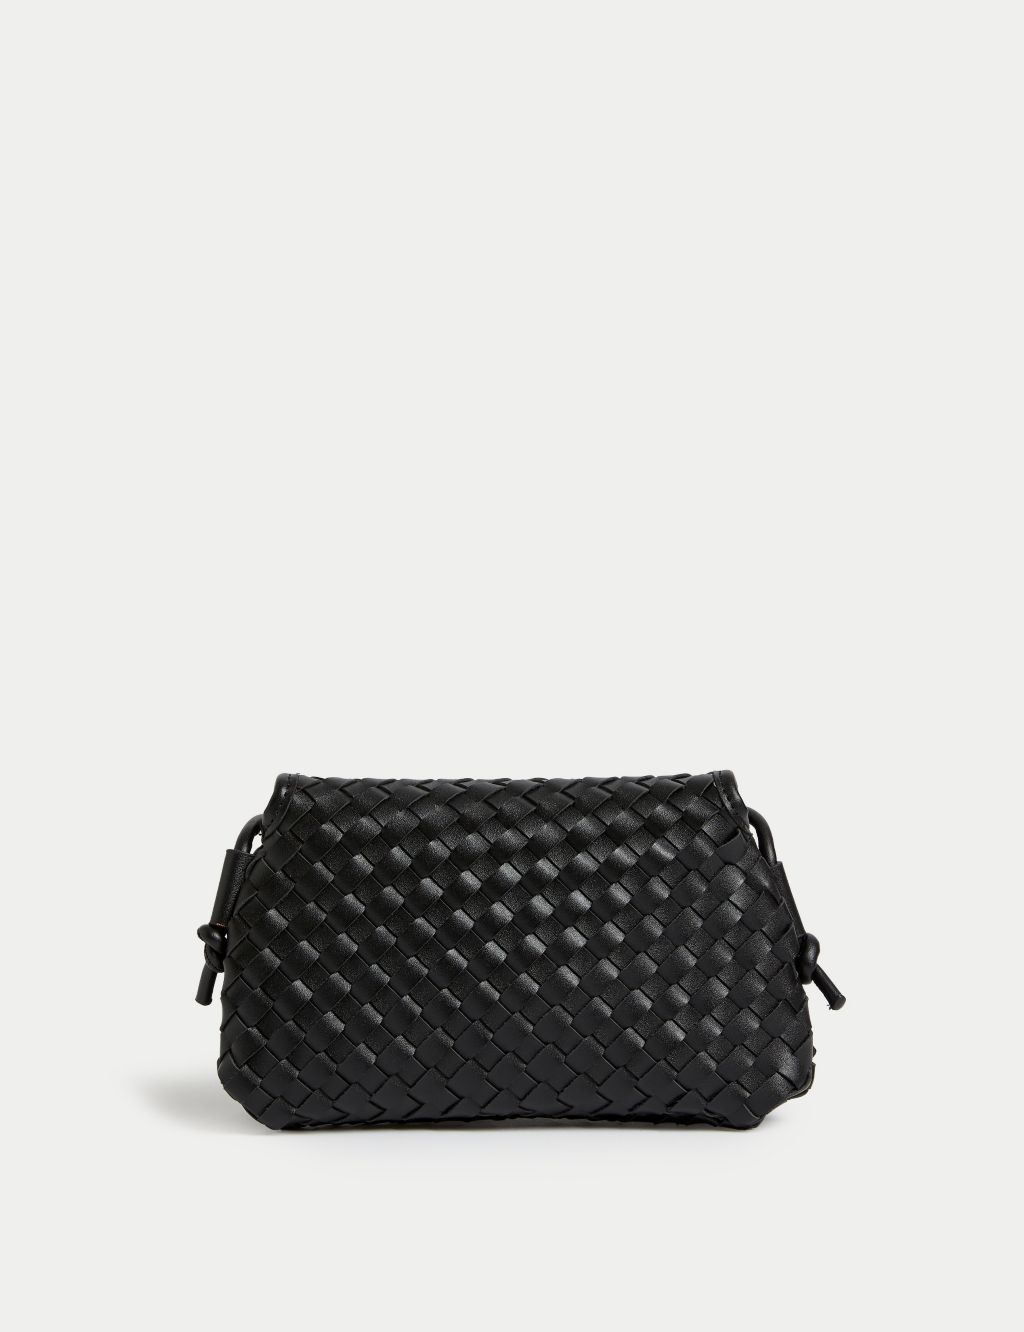 Faux Leather Woven Cross Body Bag image 3